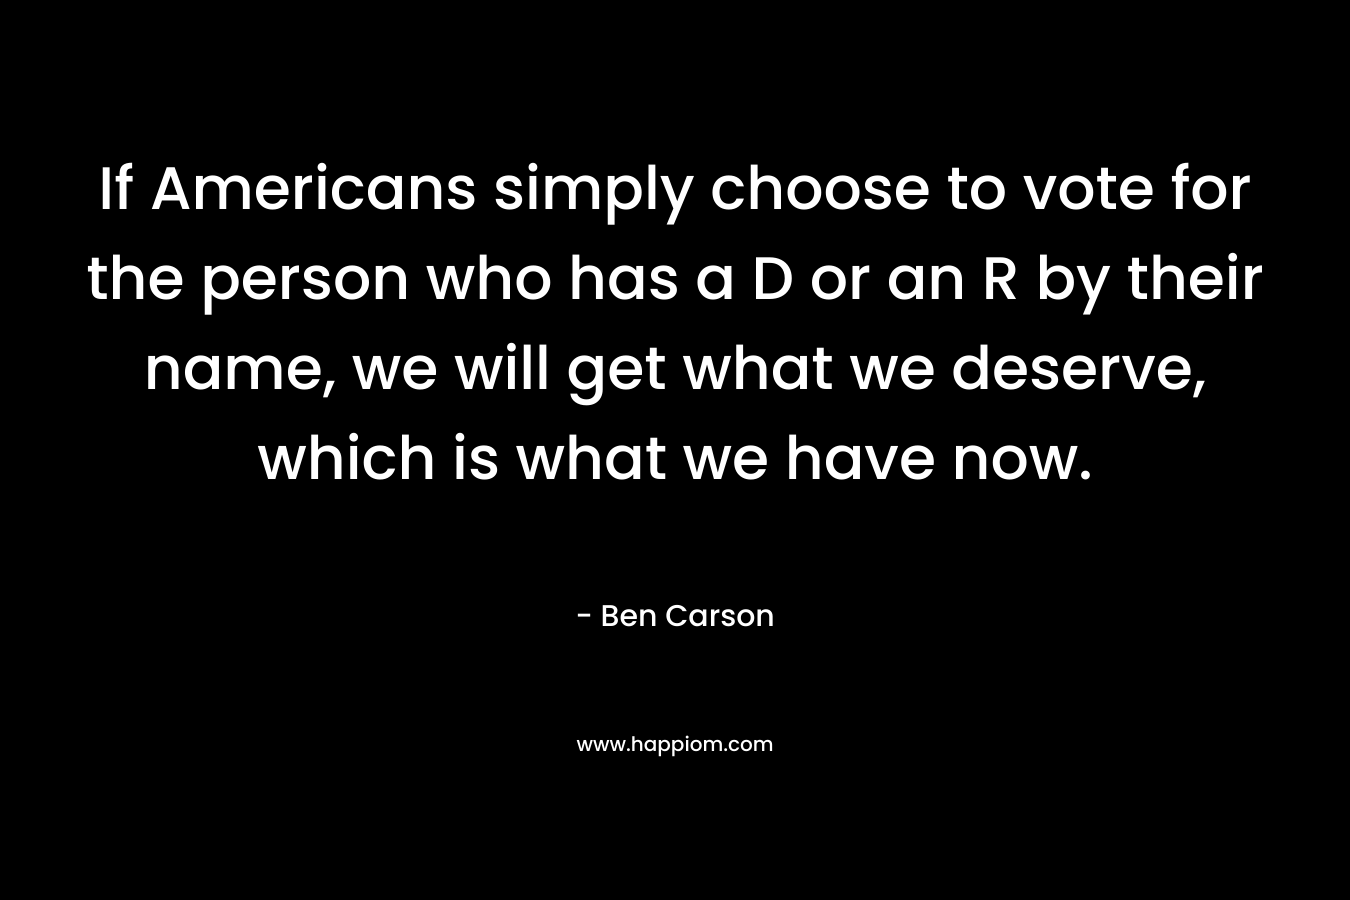 If Americans simply choose to vote for the person who has a D or an R by their name, we will get what we deserve, which is what we have now. – Ben Carson